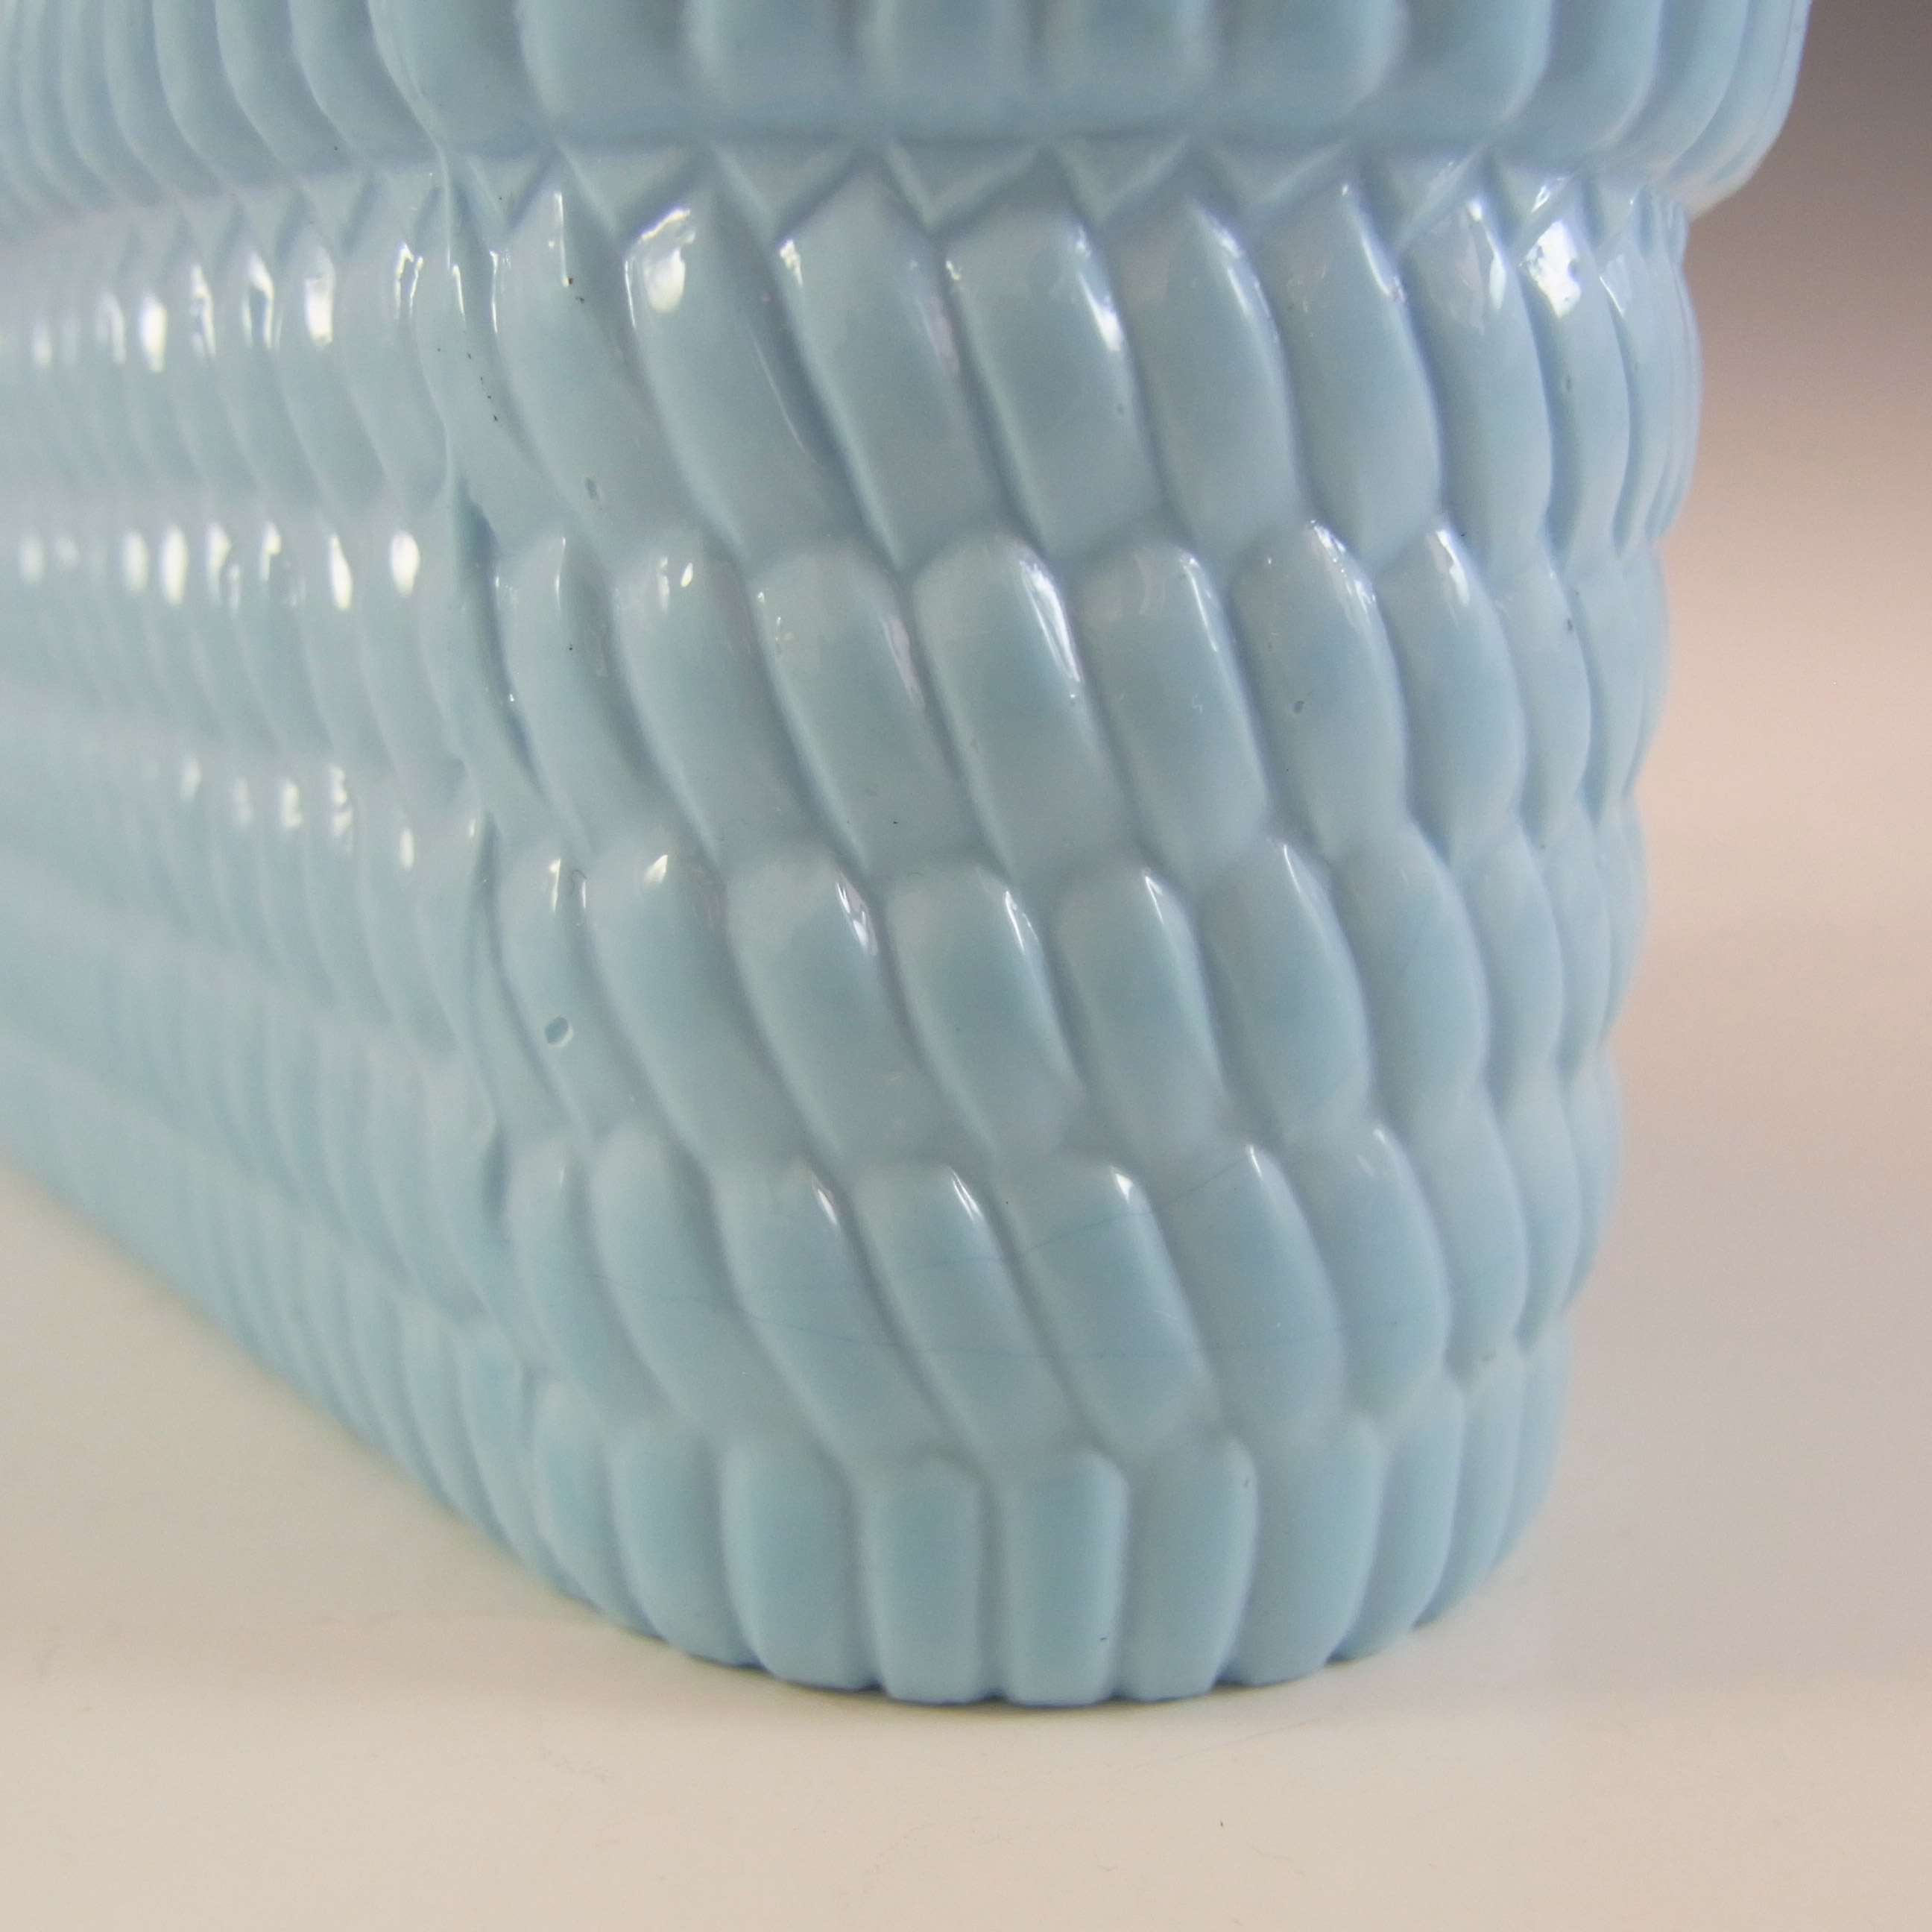 Sowerby #1192½ Victorian Blue Milk Glass Antique Basket Bowl - Click Image to Close